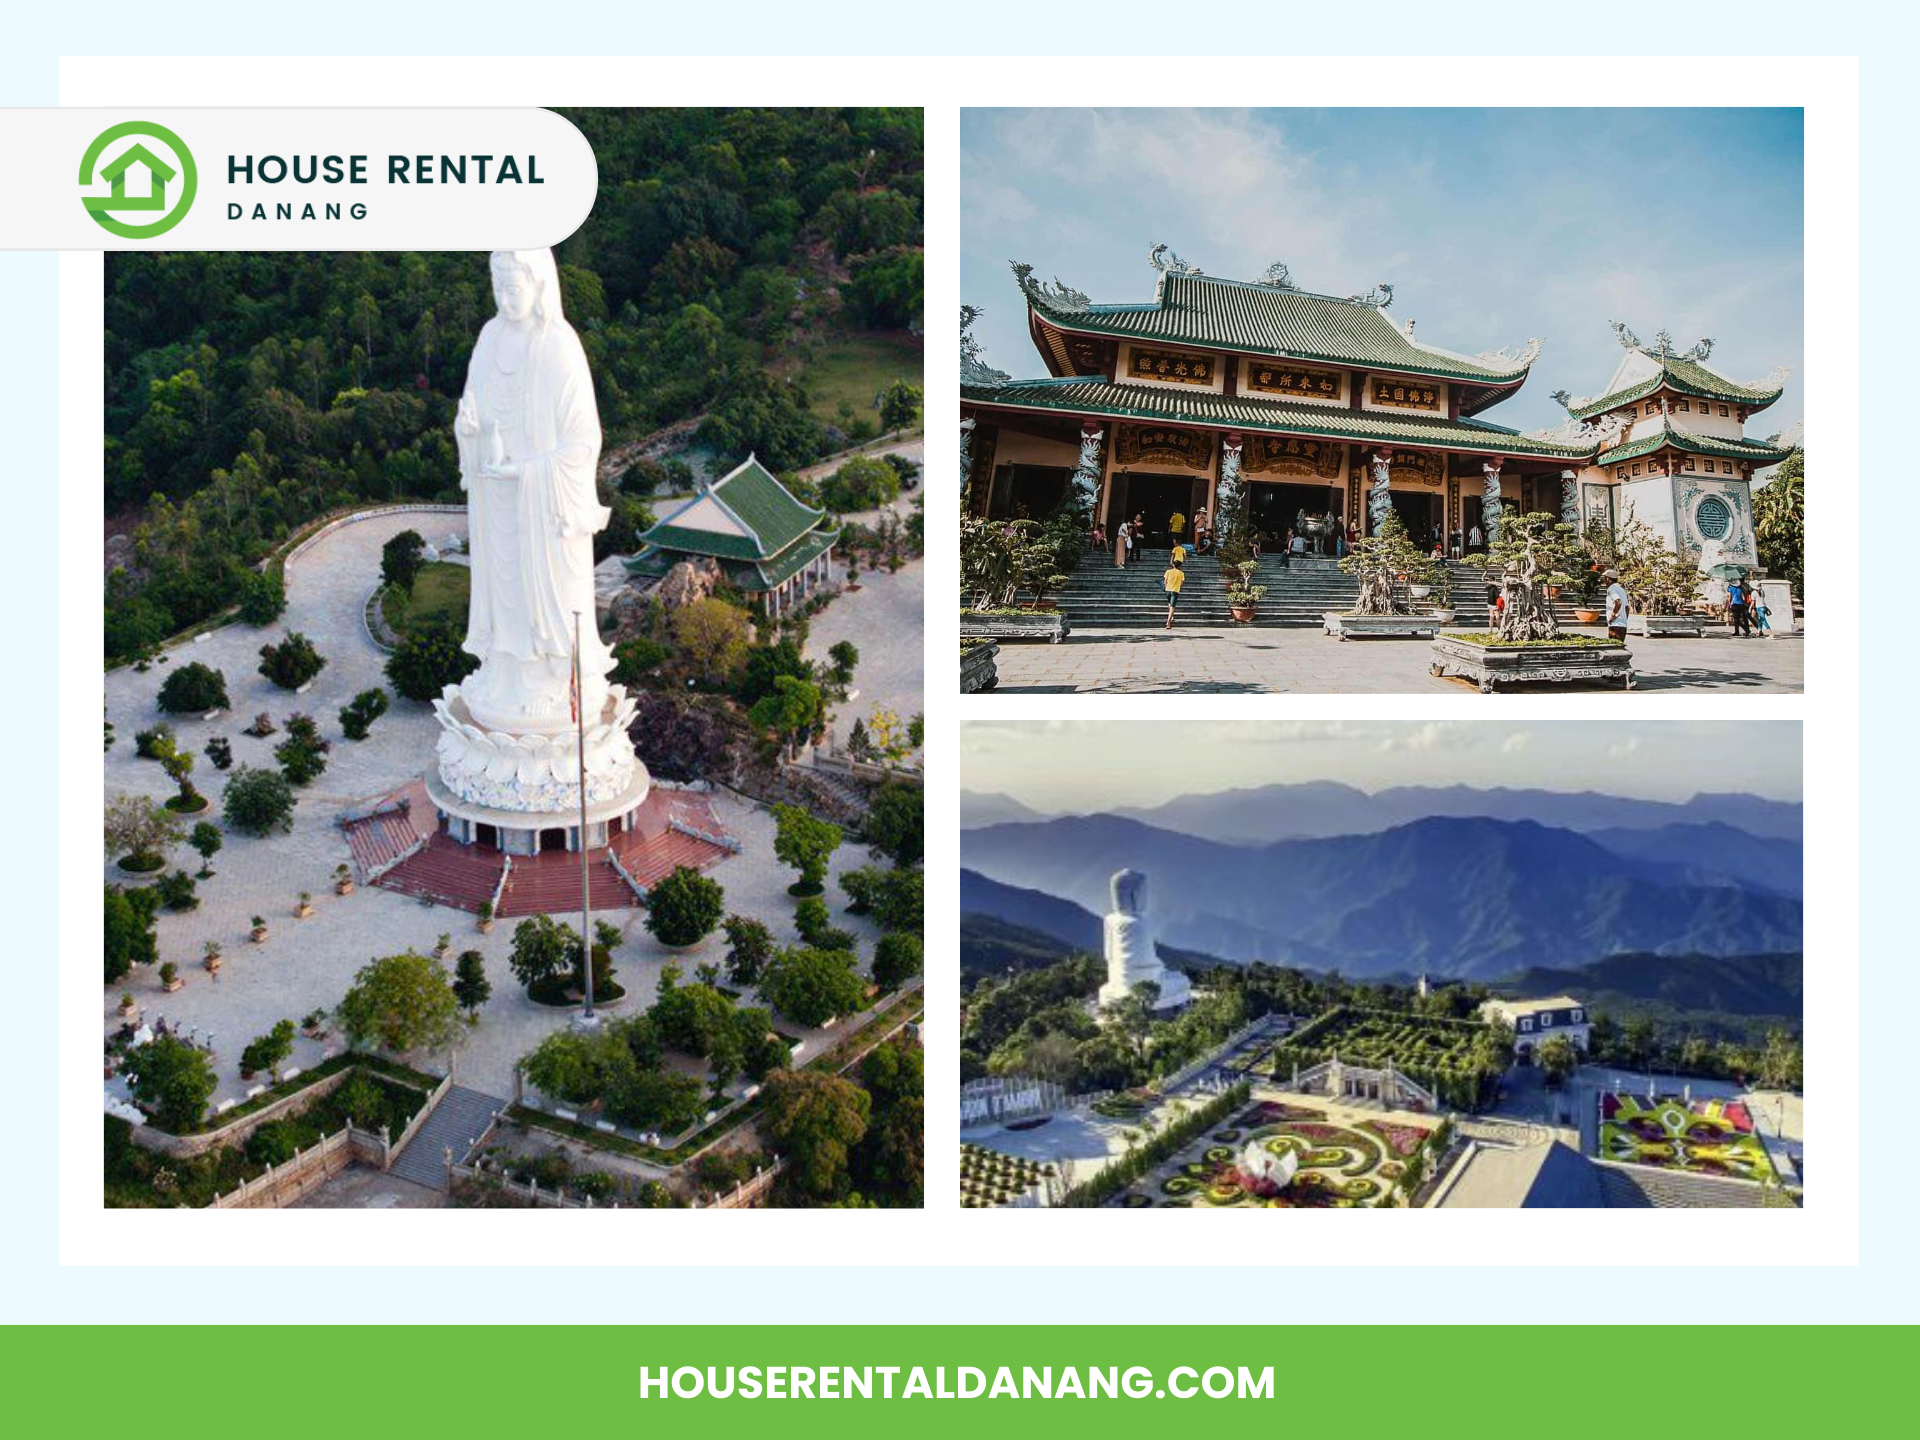 Composite image of a large statue at Linh Ung Pagoda in an outdoor setting, a traditional temple building, and a panoramic shot of a garden and mountains. Text reads "House Rental Danang" and "houserentaldanang.com".